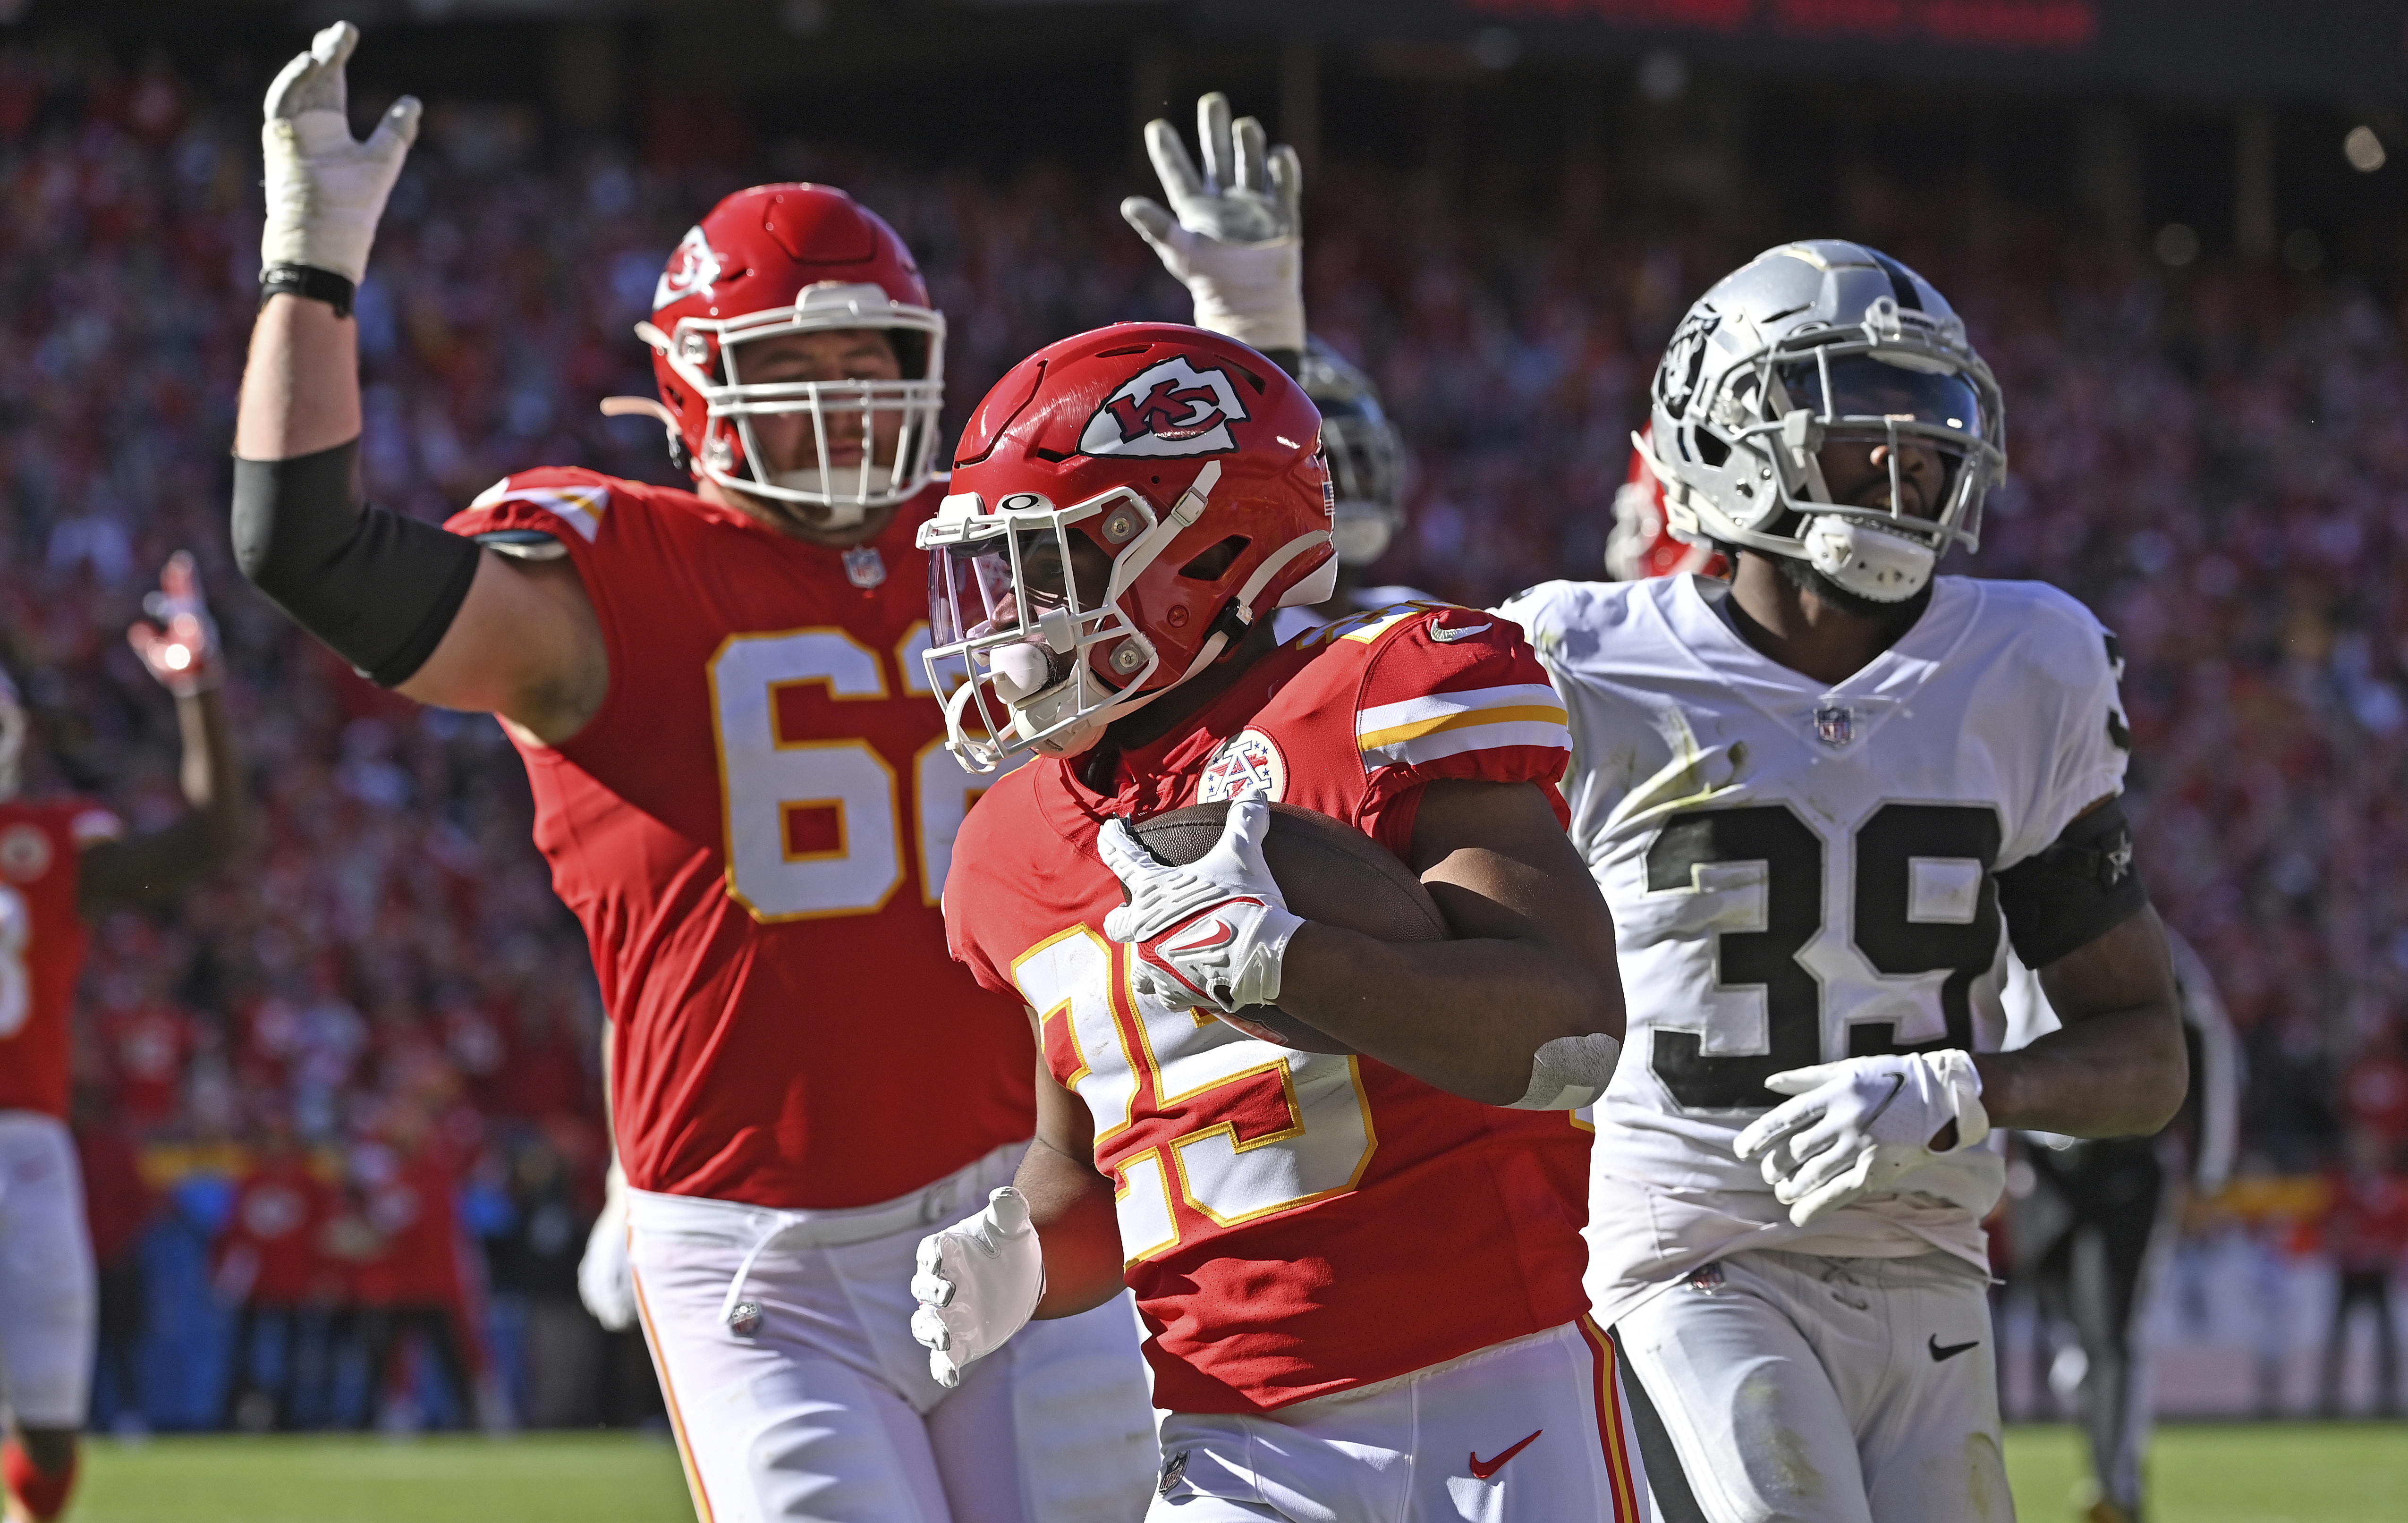 Chiefs vs. Raiders: The best player prop bets for SNF